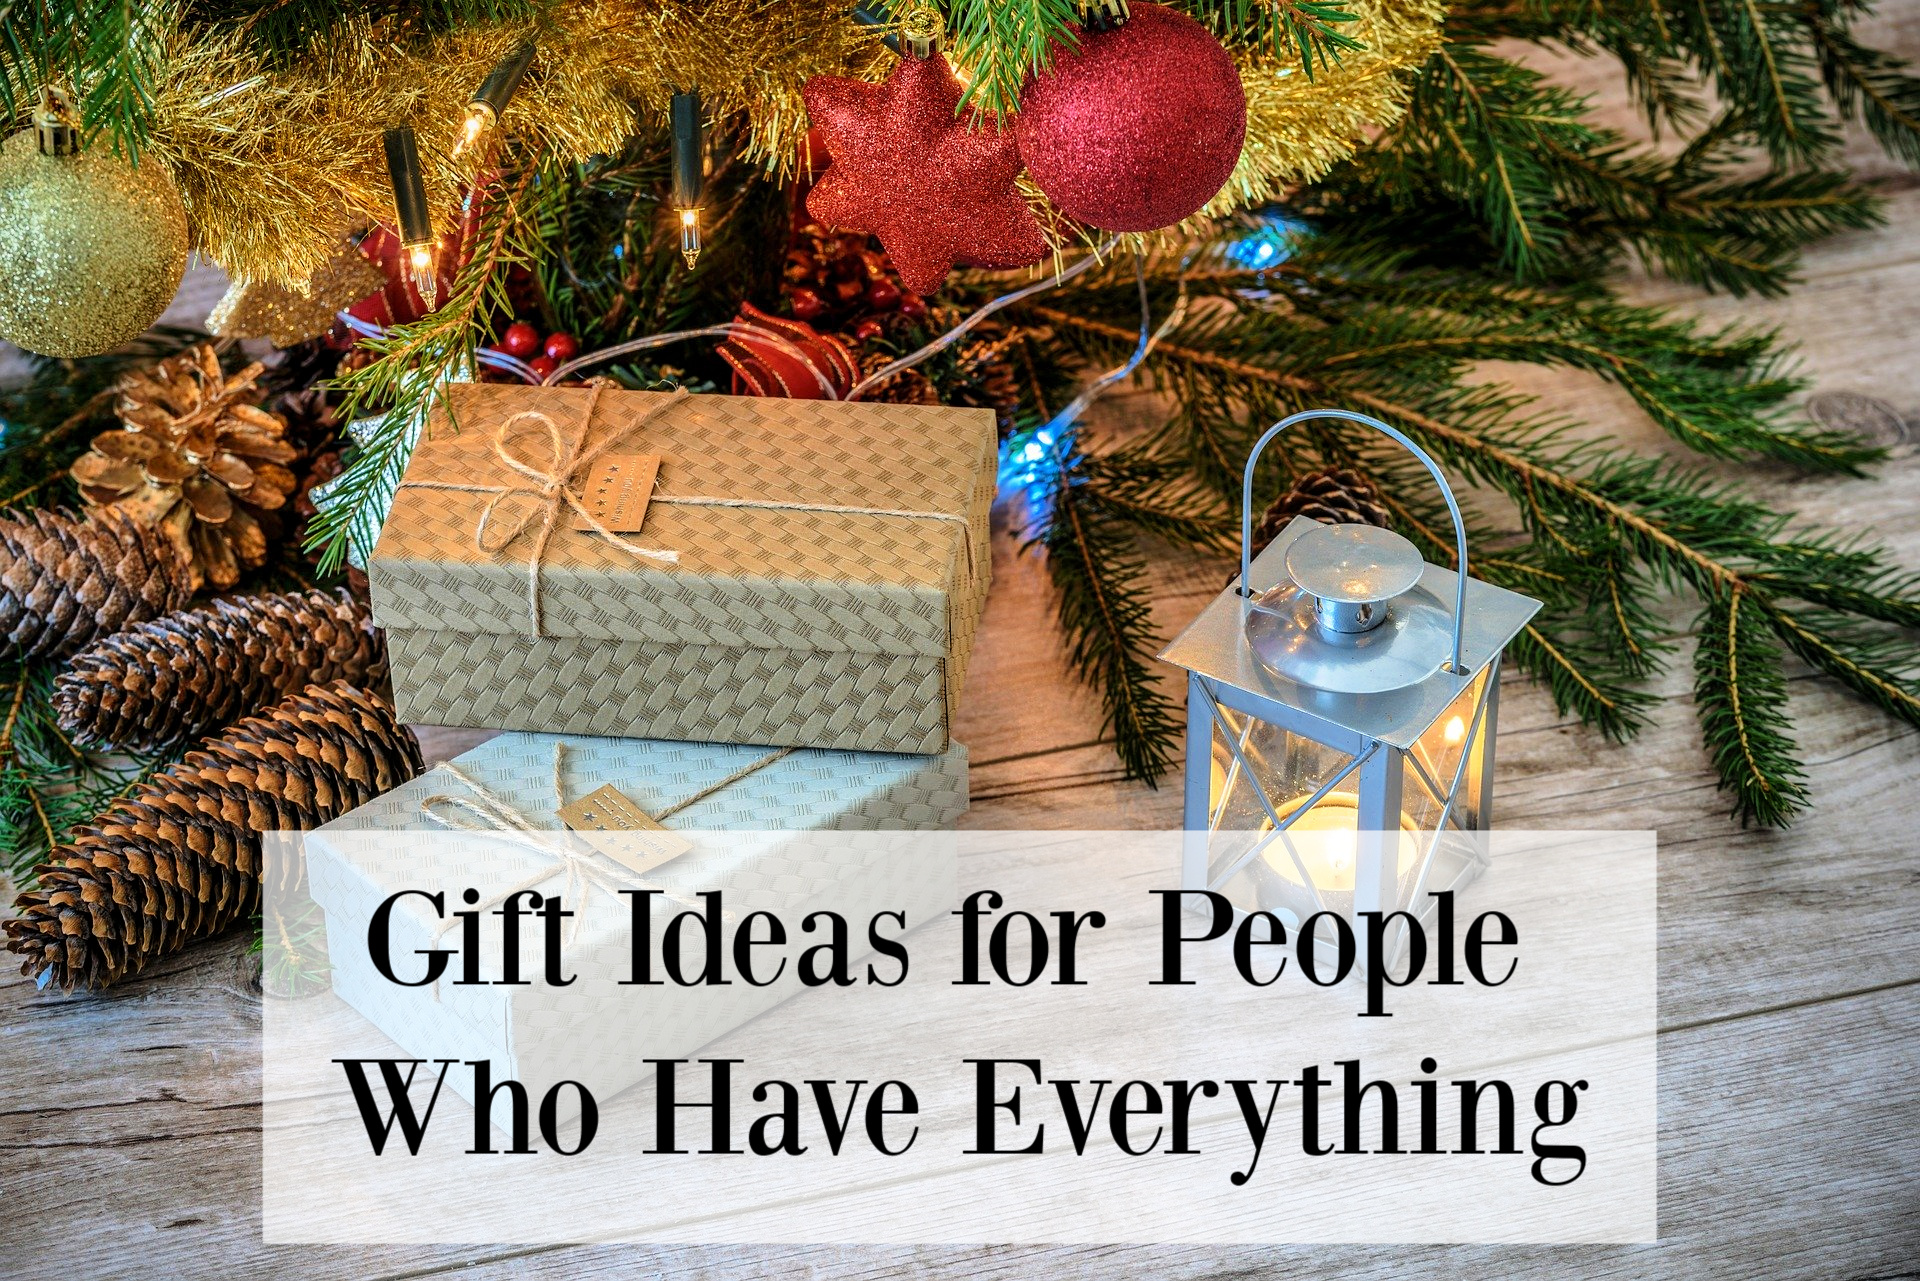 Gifts for people who have everything